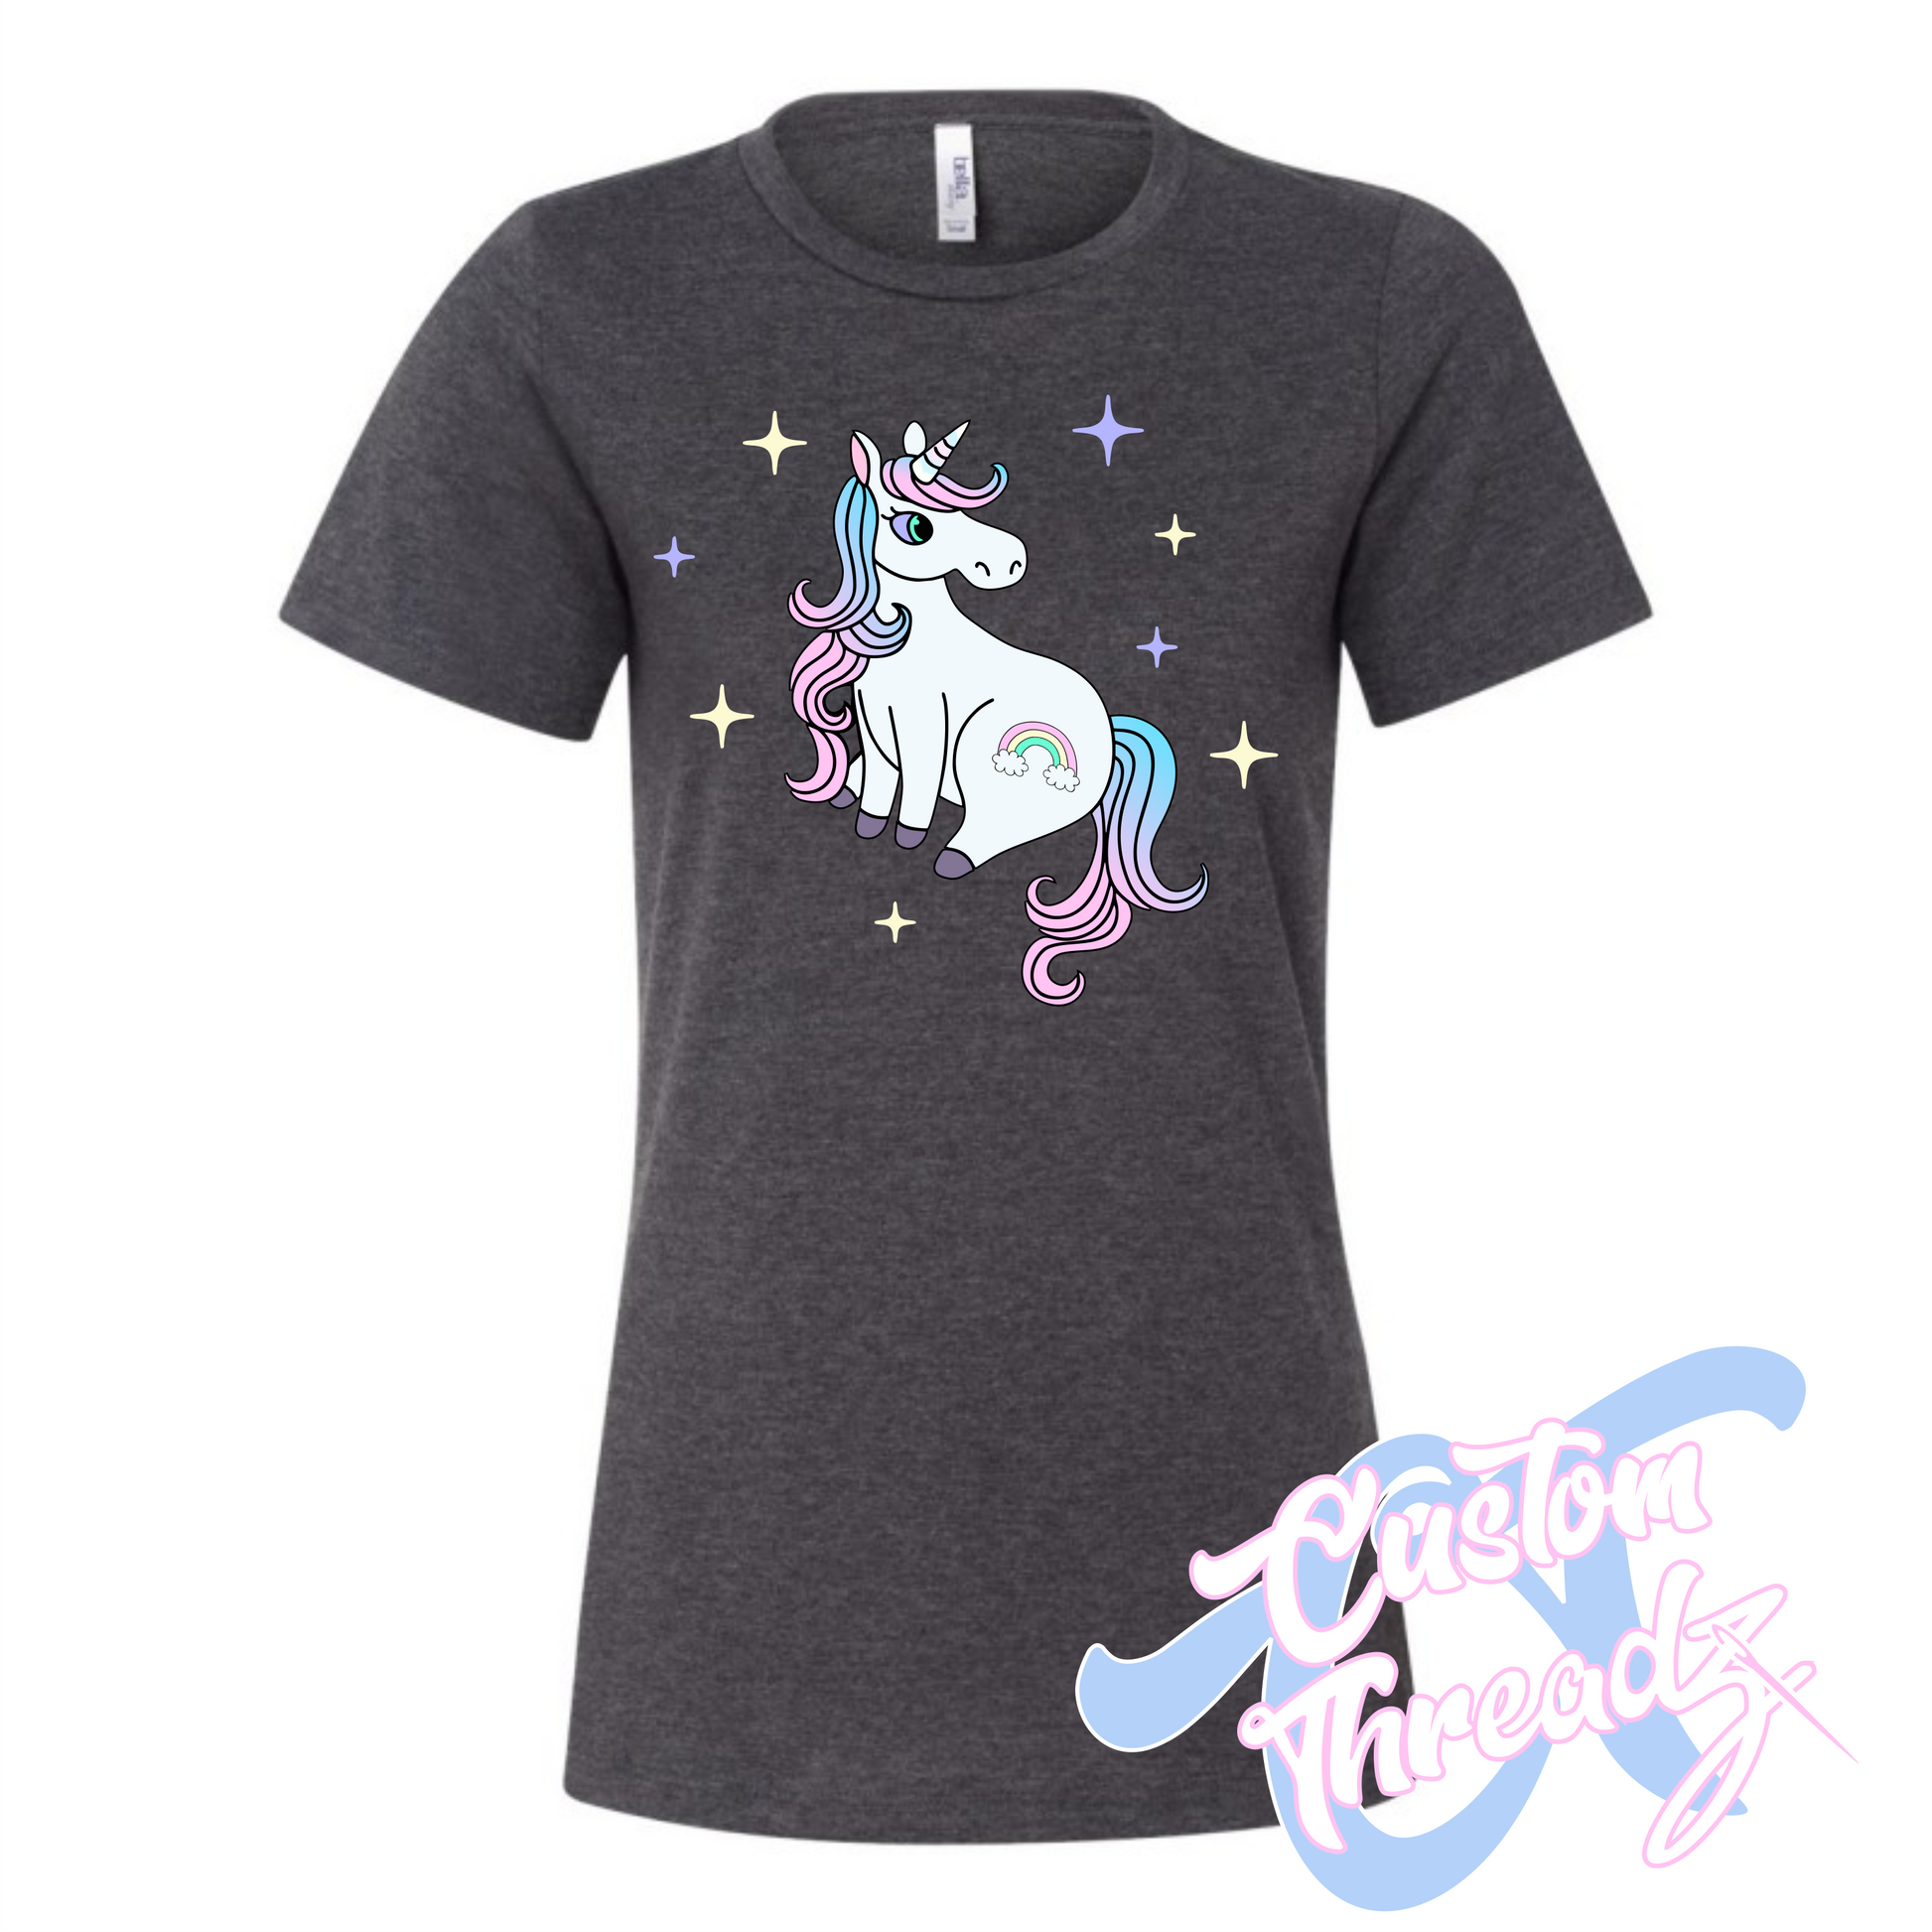 charcoal grey womens tee with unicorn rainbow DTG printed design